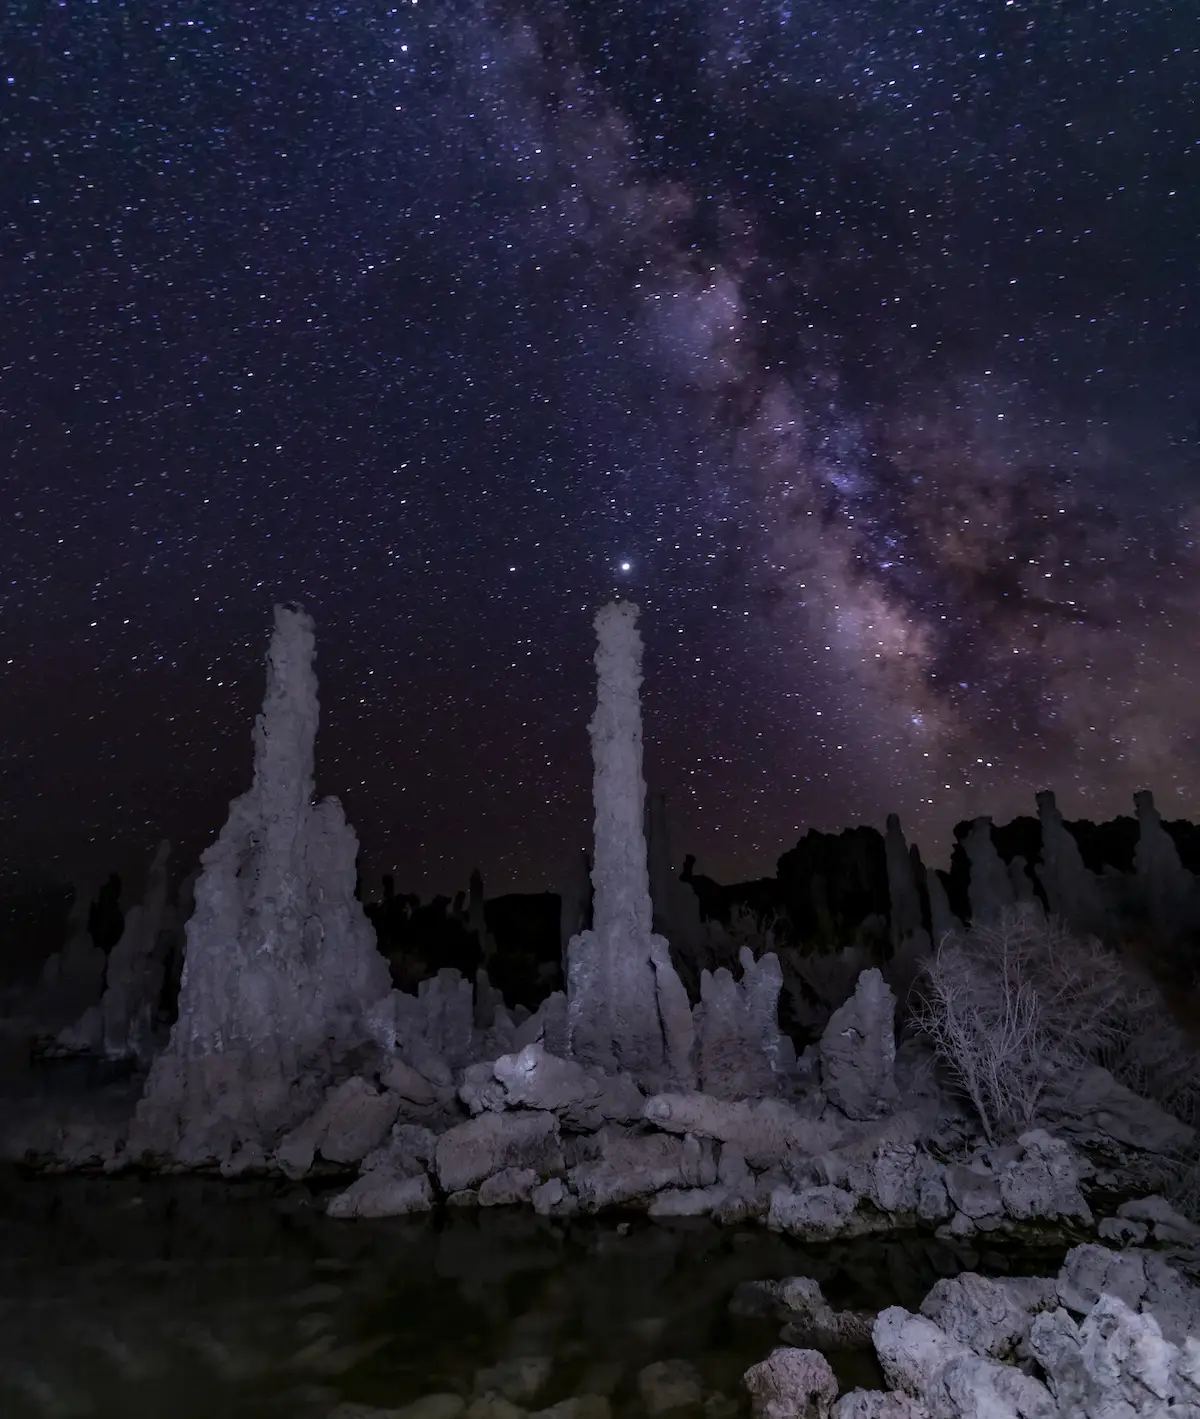 Tufas lit up by Milky Way and night sky in nature photo by Jay Tamang